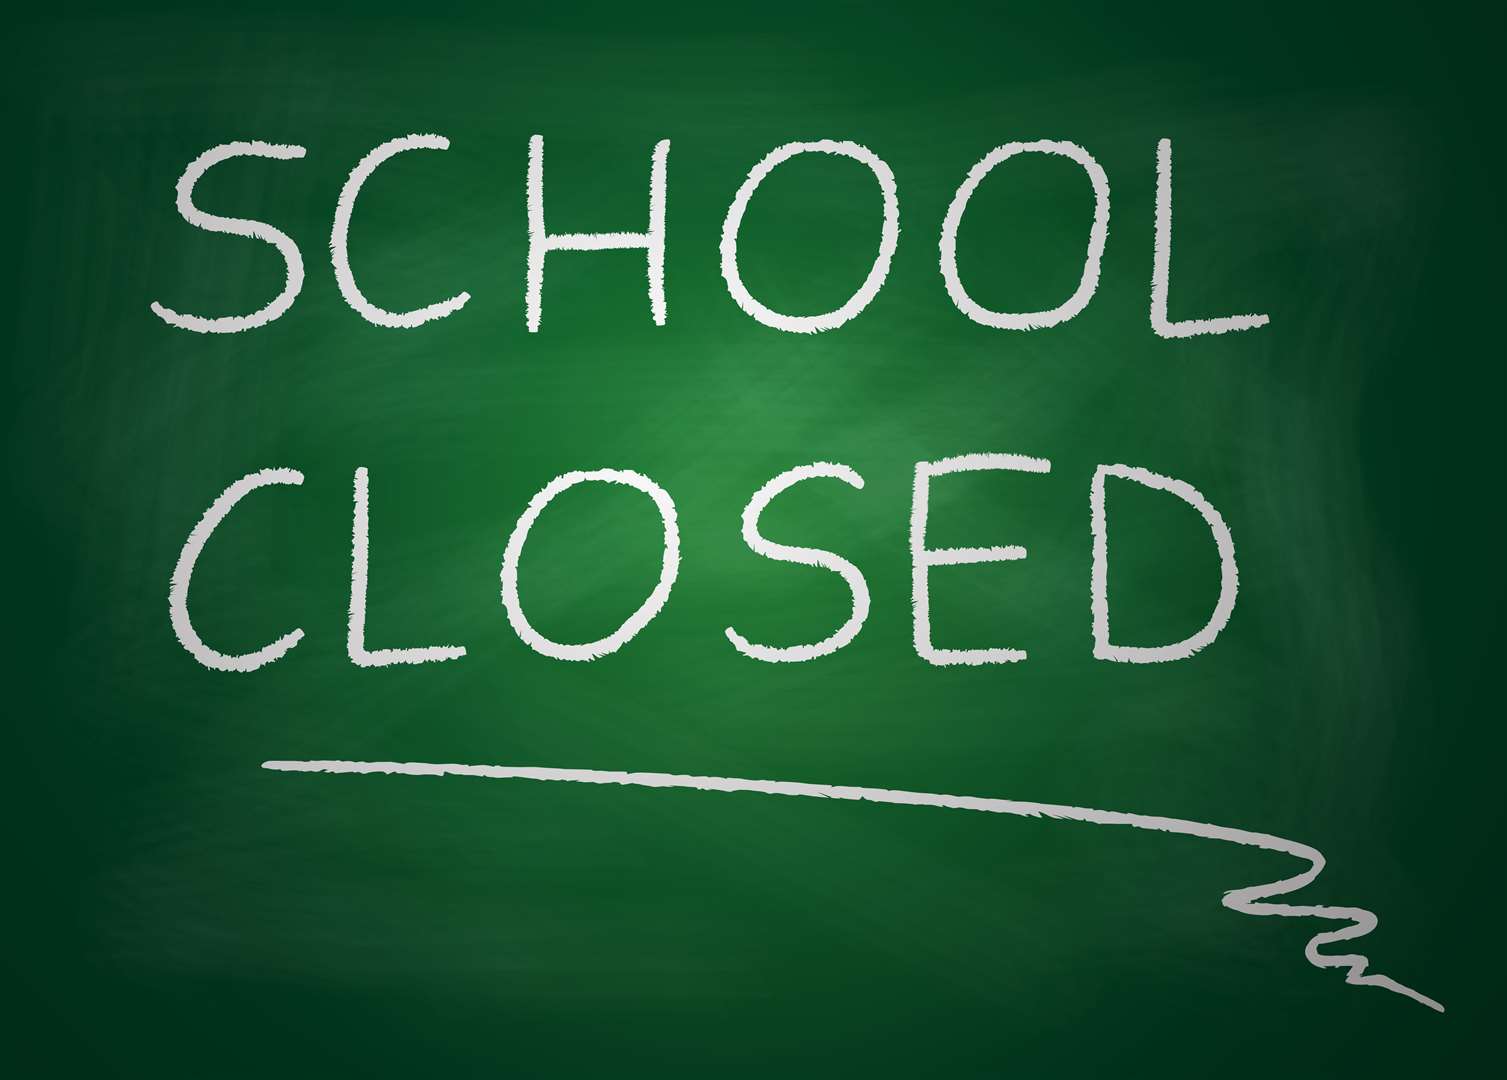 Durness Primary School is closed today.